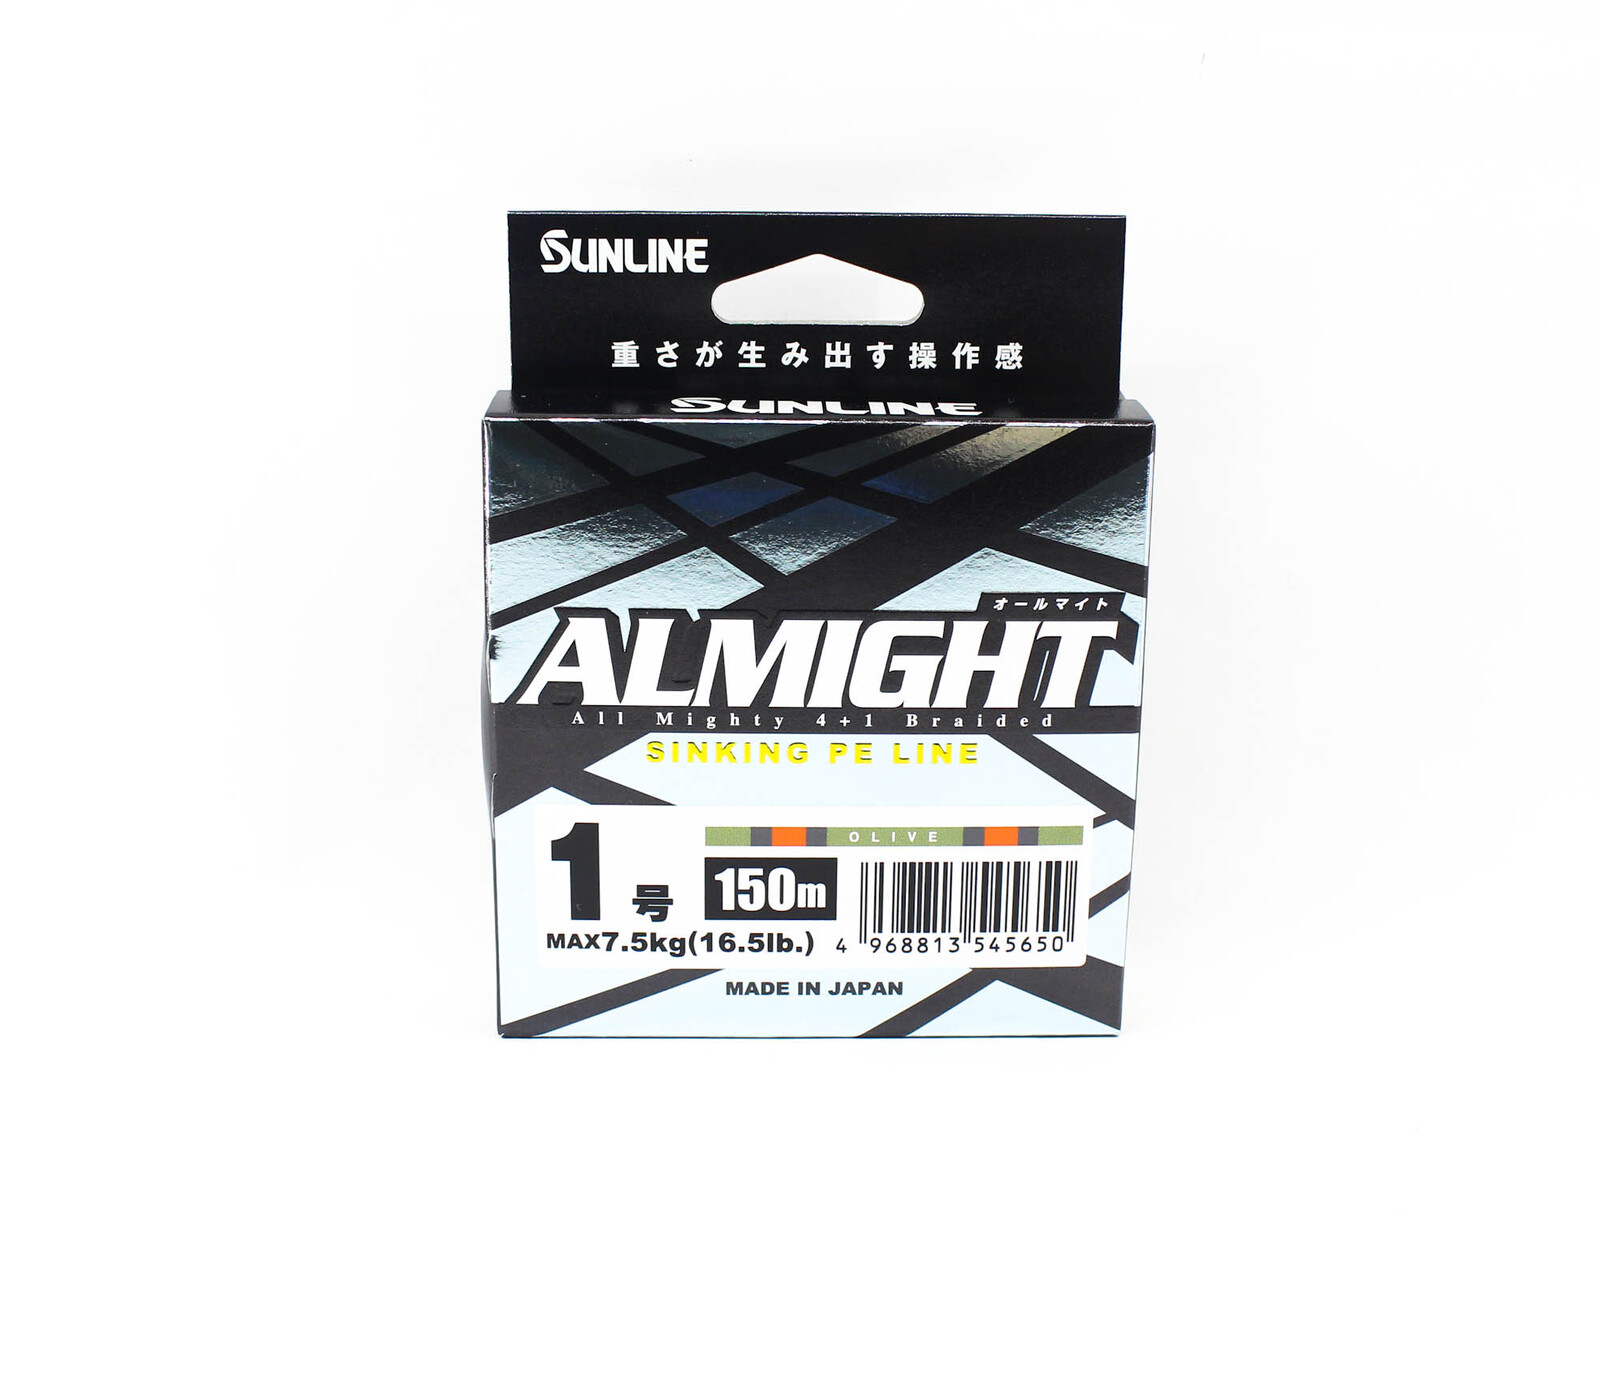 Sunline Almight x5 150m Olive Sinking Braid Fishing Line - Choose Lb